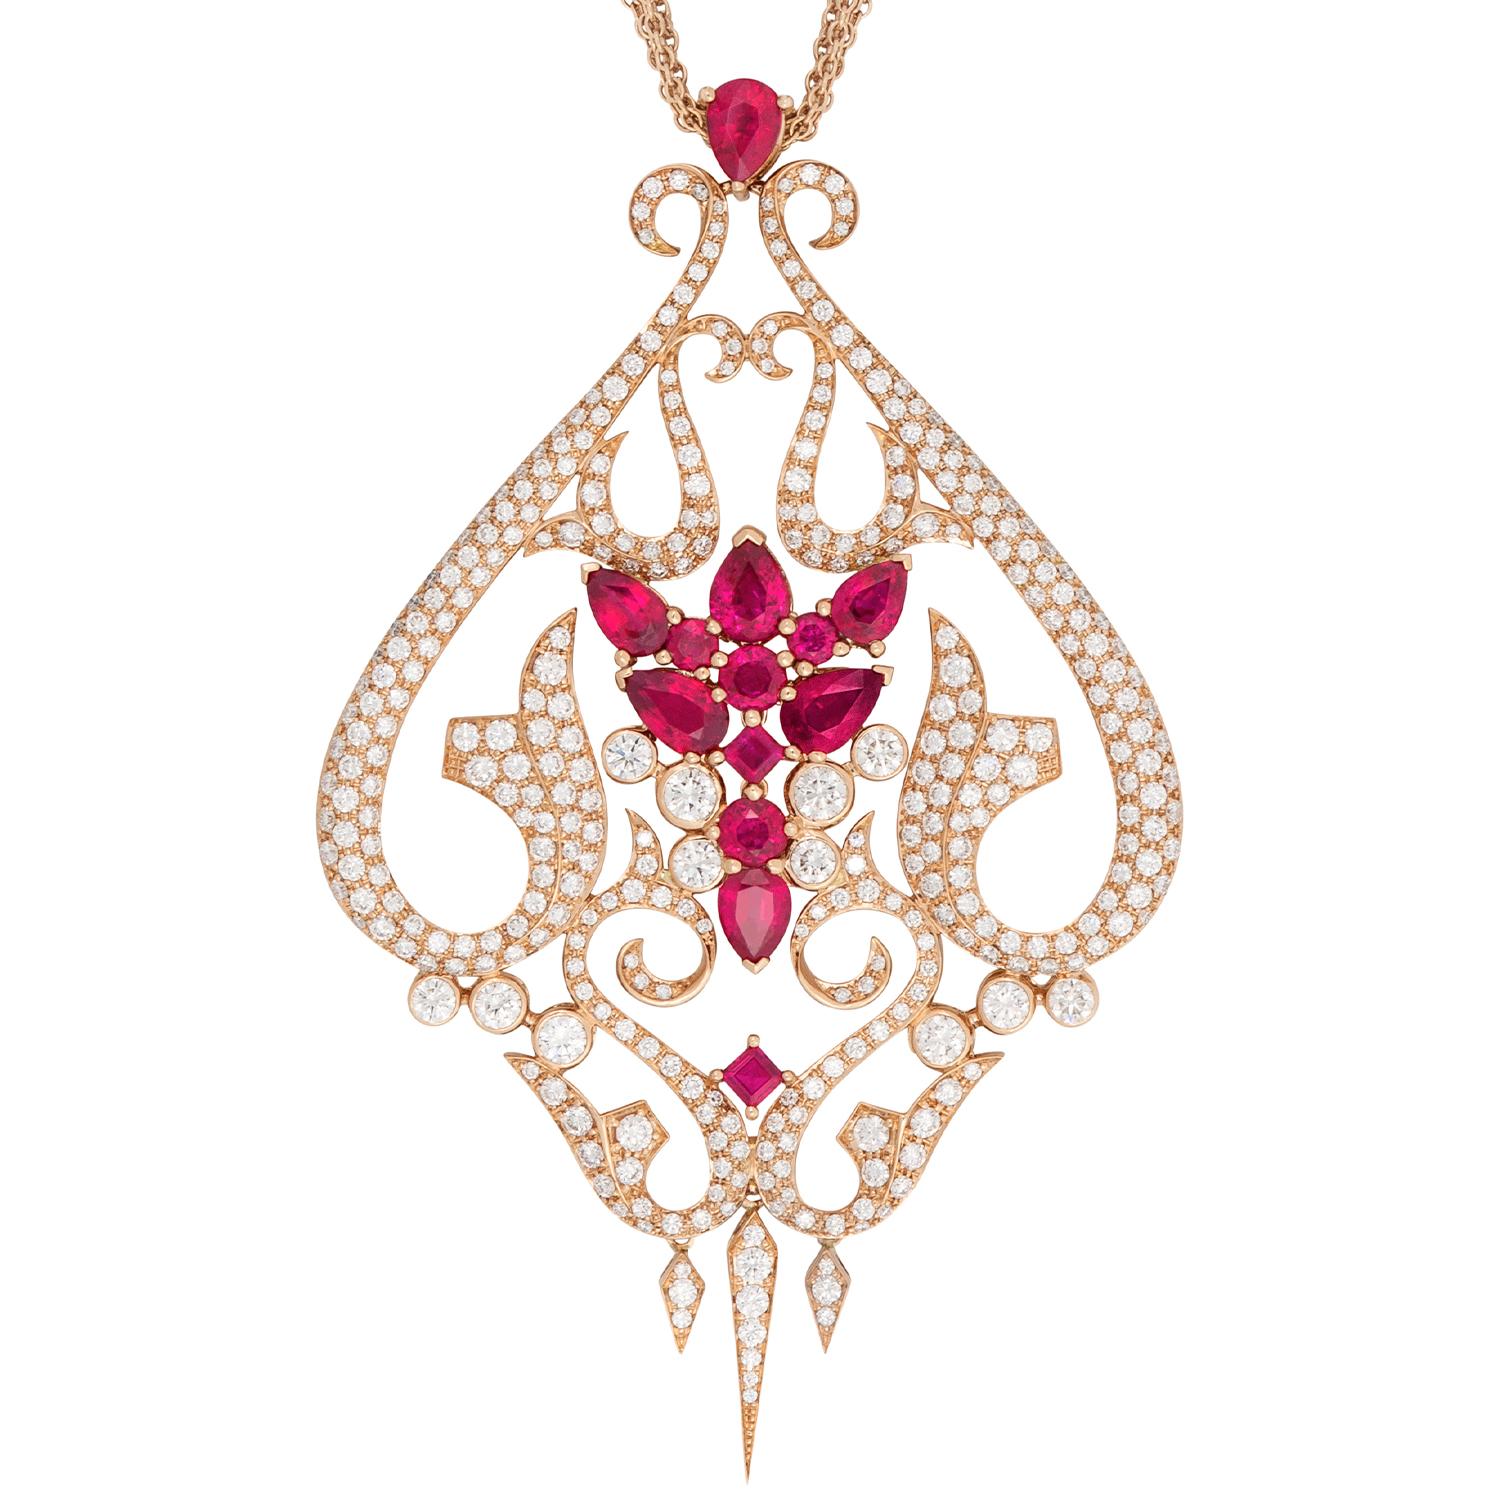 Belle Epoque Pendant set with white Diamond pavé (5.75ct) and Rubies (6.09ct) in 18ct rose Gold on a 5-row 17-inch white Diamond spacer chain.

Built on a foundation of 40 years of technical excellence, where Webster began his apprenticeship at the